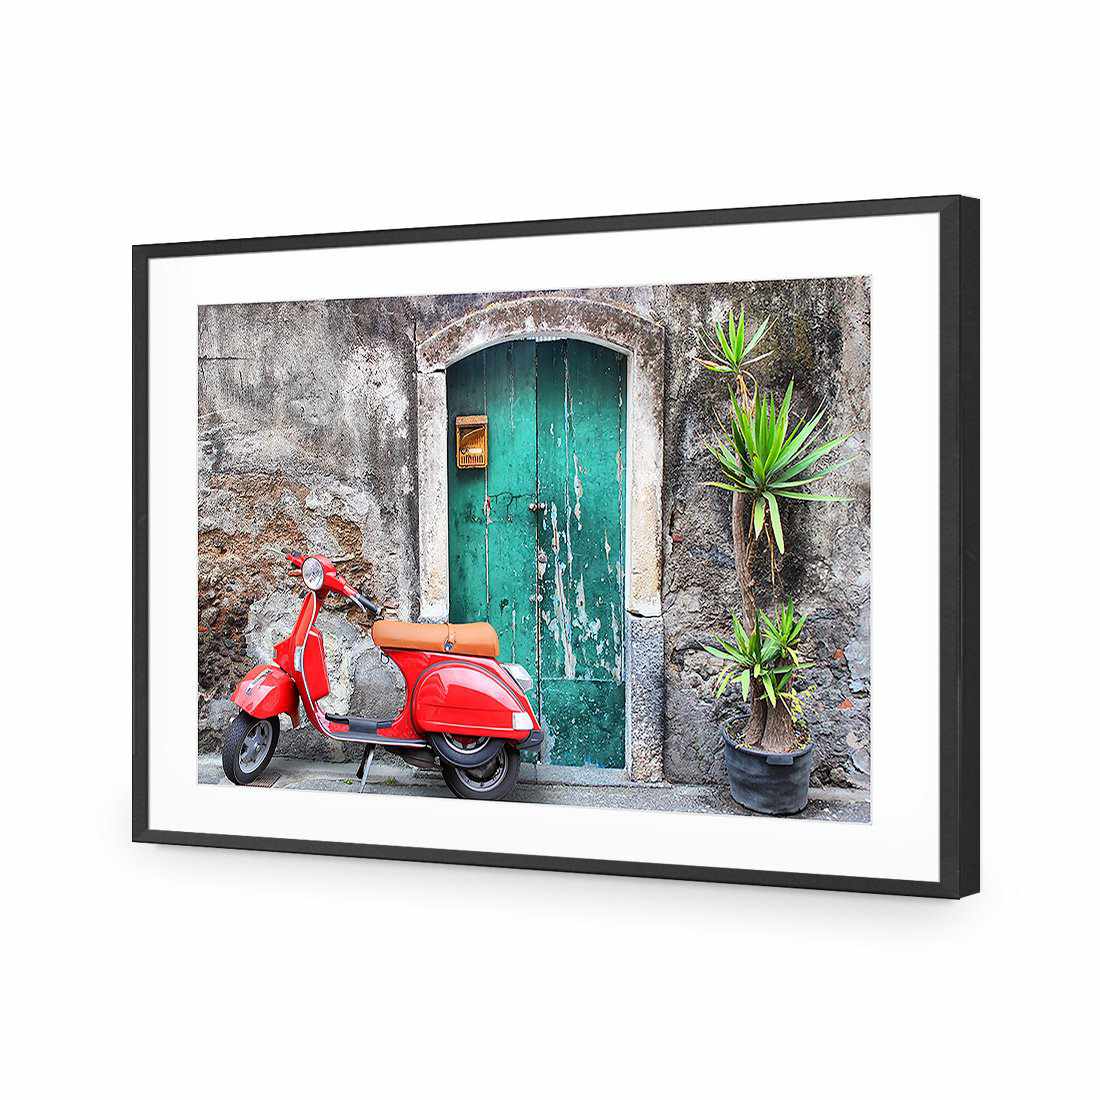 Vintage Door And Scooter-Acrylic-Wall Art Design-With Border-Acrylic - Black Frame-45x30cm-Wall Art Designs